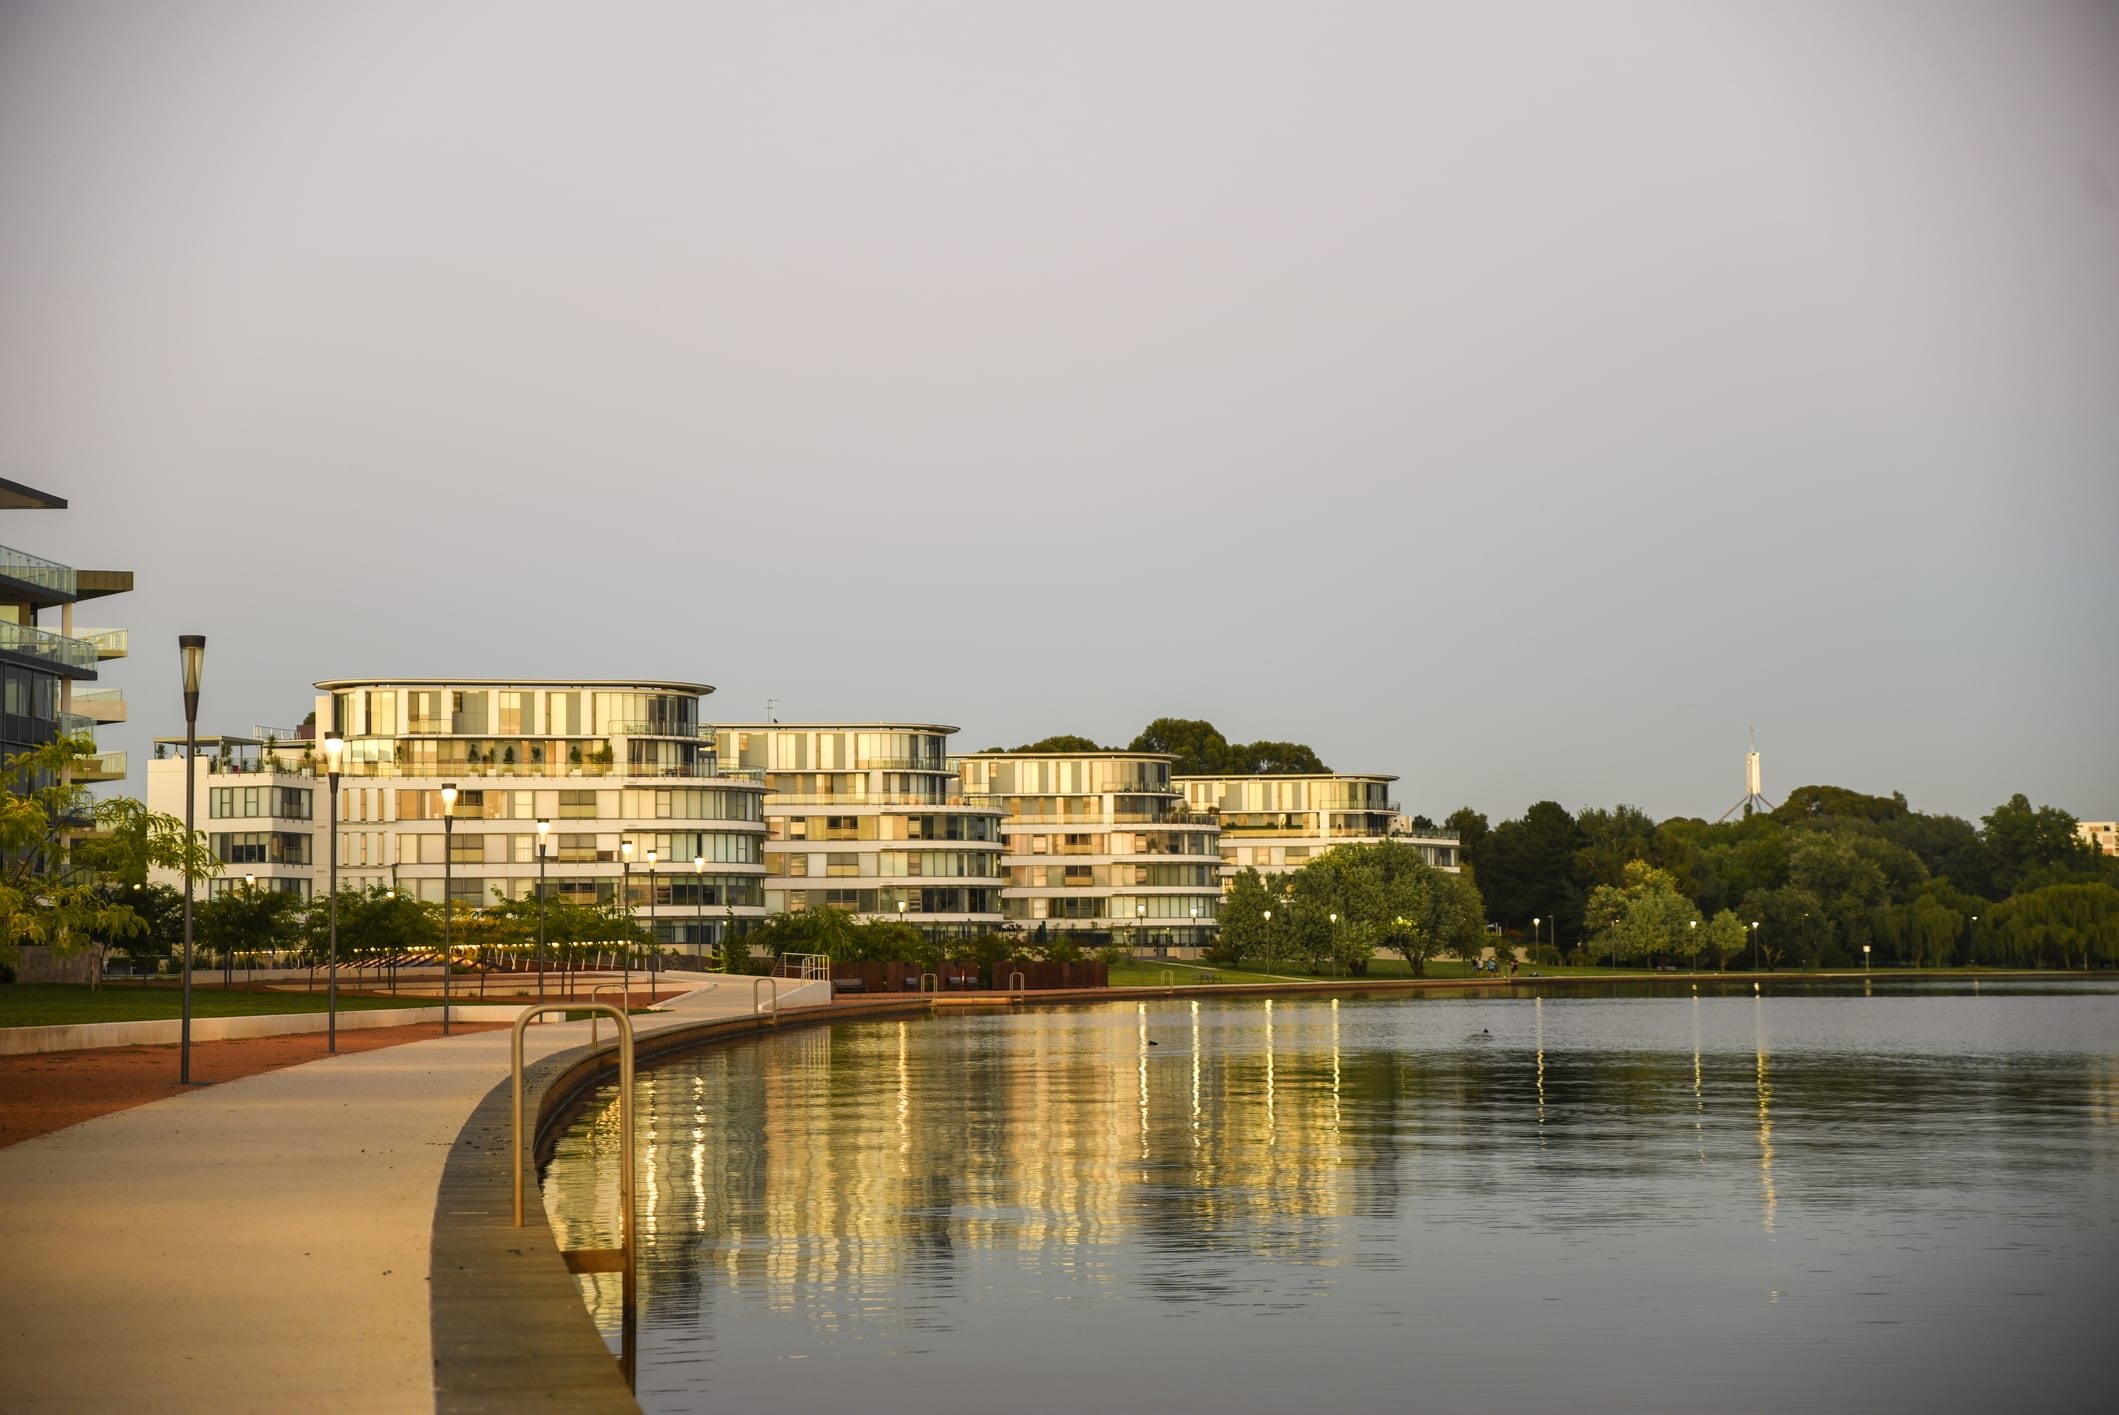 The leafy Kingston Foreshore suburb along lake Burley Griffin